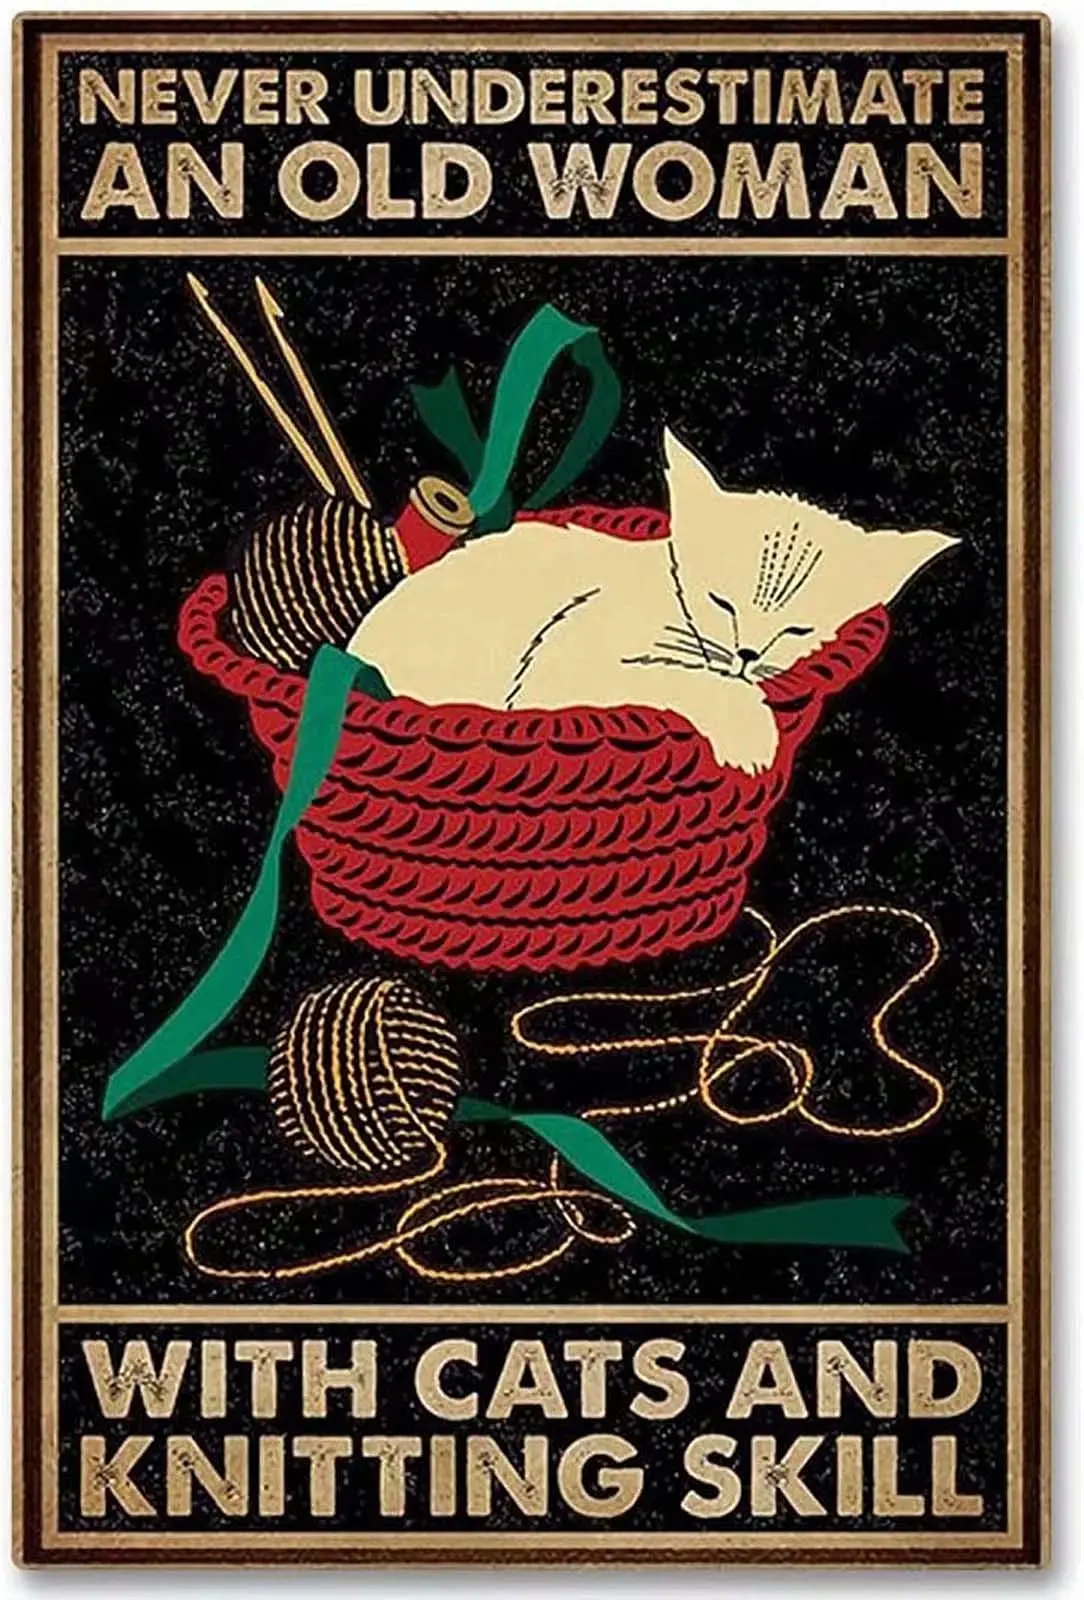 

Retro Metal Tin Sign Wall Decor - with Cats Knitting - Funny Vintage Tin Sign Wall Plaque Poster for Cafe Bar Restaurant Superma